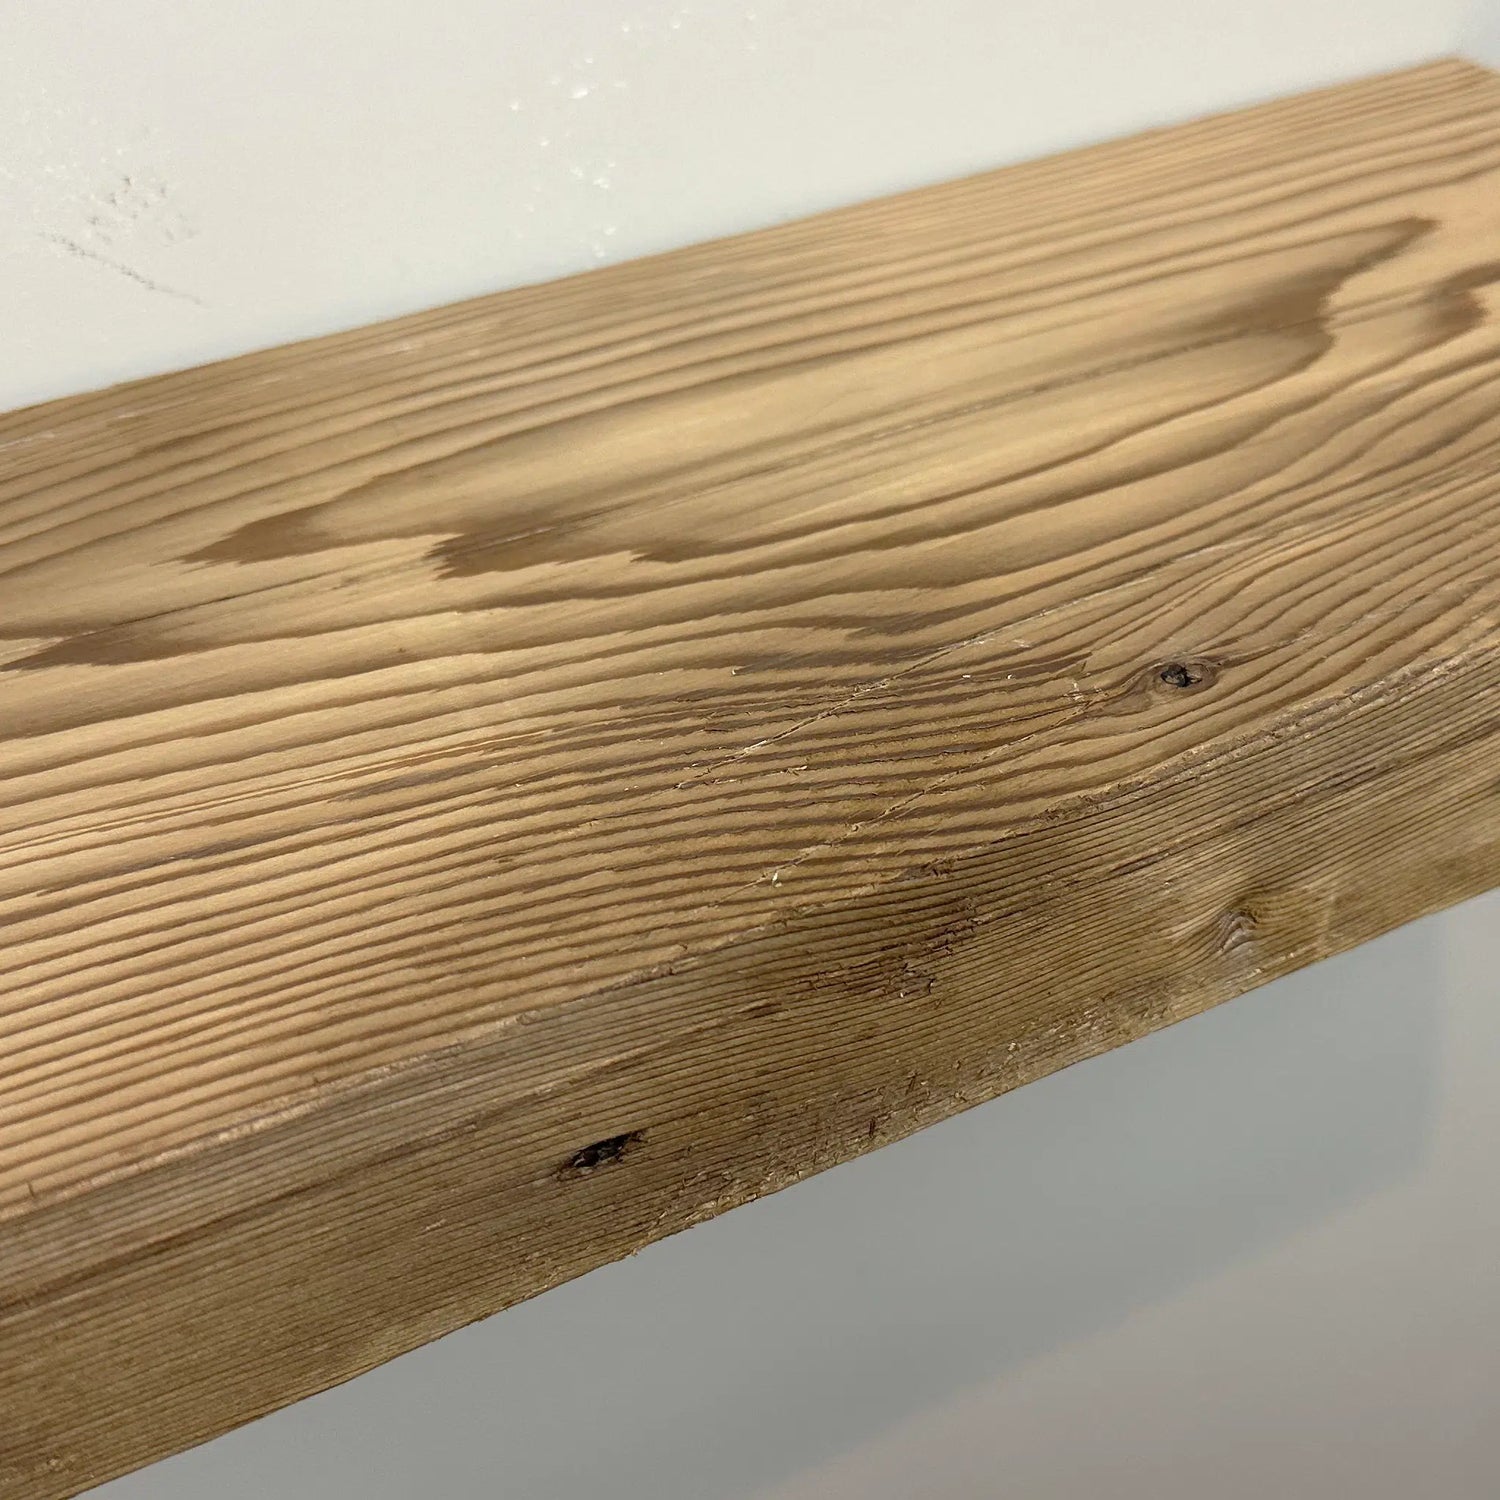 a close up of a reclaimed wood floating shelf in the natural option. Grain pattern, knots, and nail holes are present in the wood.